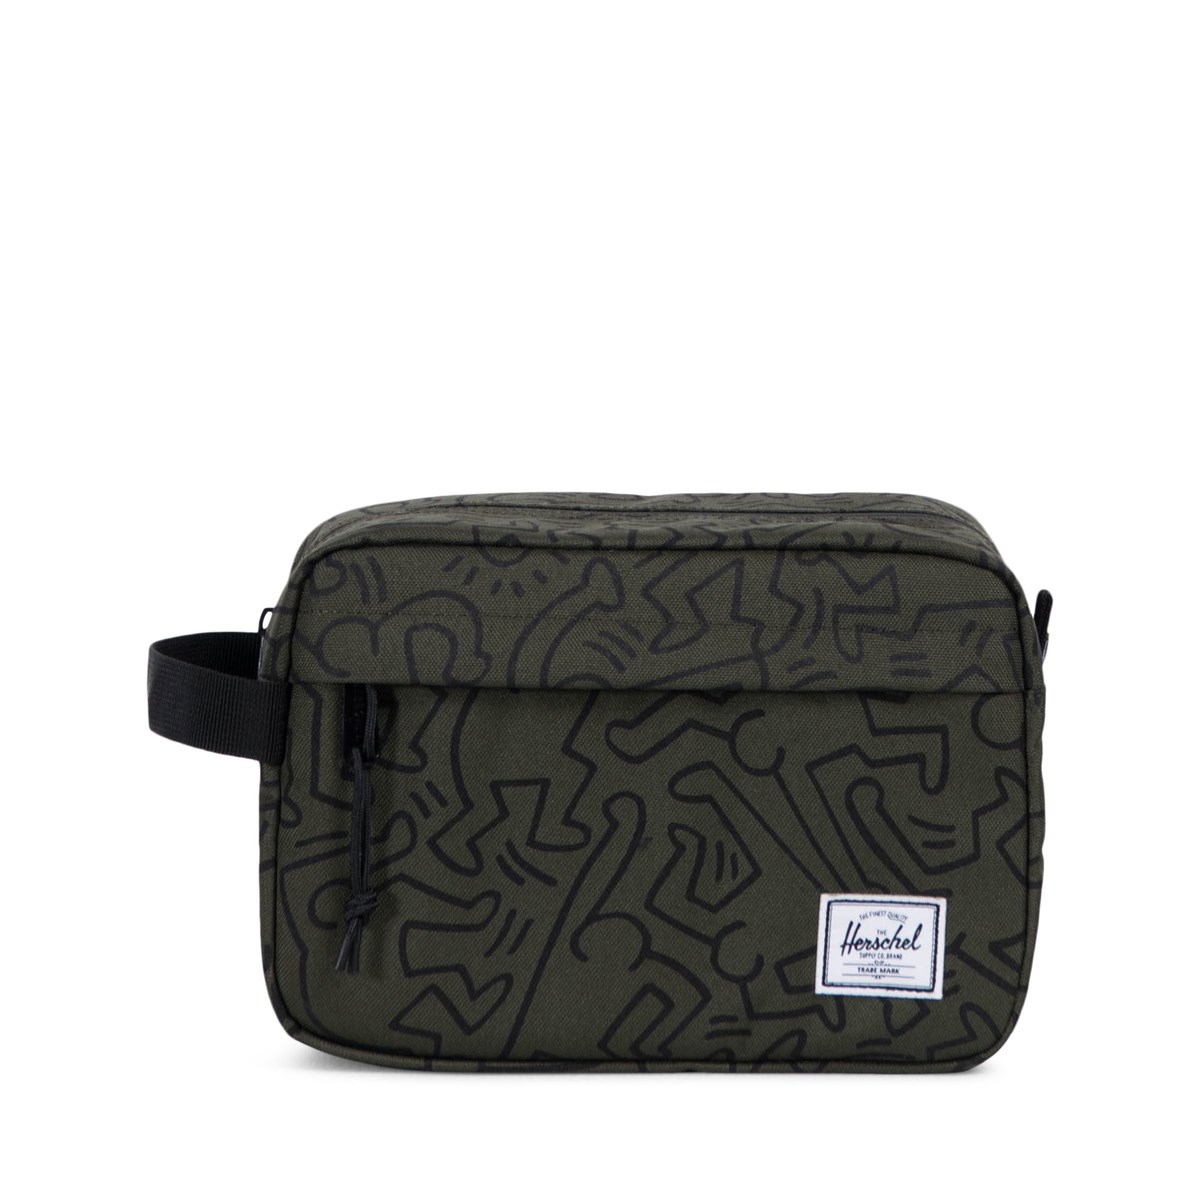 Chapter Keith Haring Travel Case | Little Burgundy